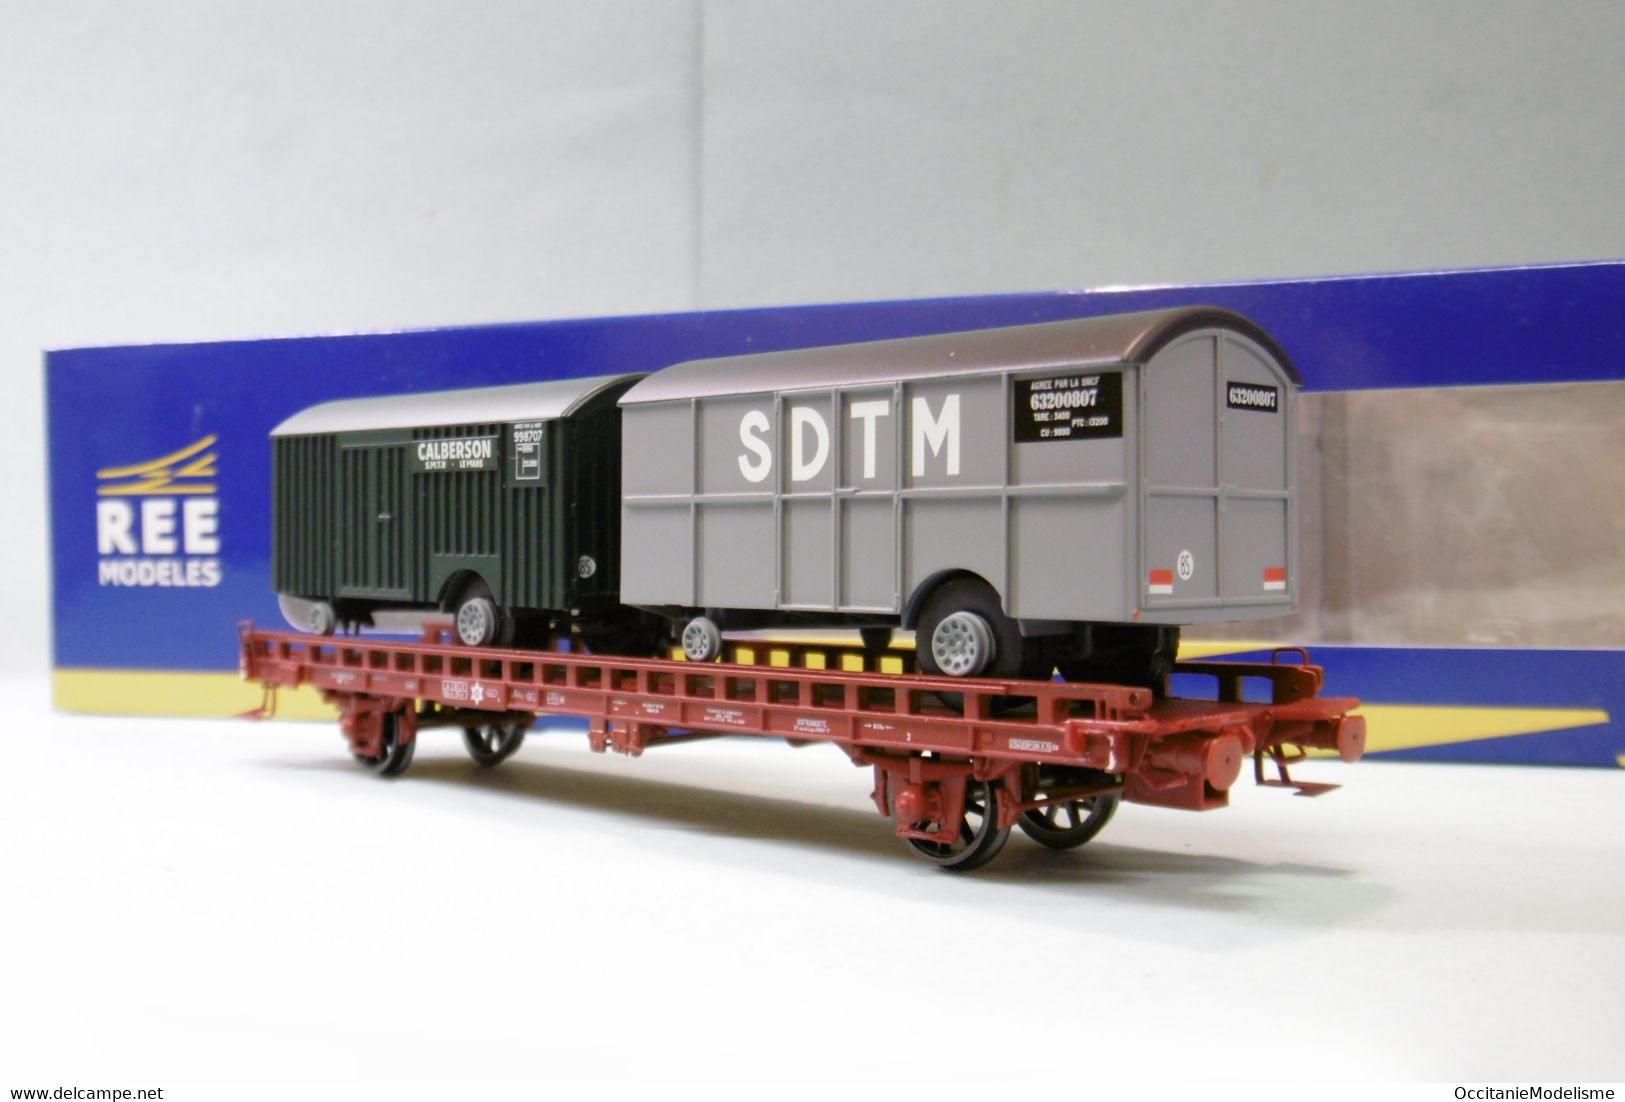 REE - WAGON UFR Biporteur Calberson + SDTM SNCF Ep. IV Réf. WB-622 Neuf NBO HO 1/87 - Wagons Marchandises